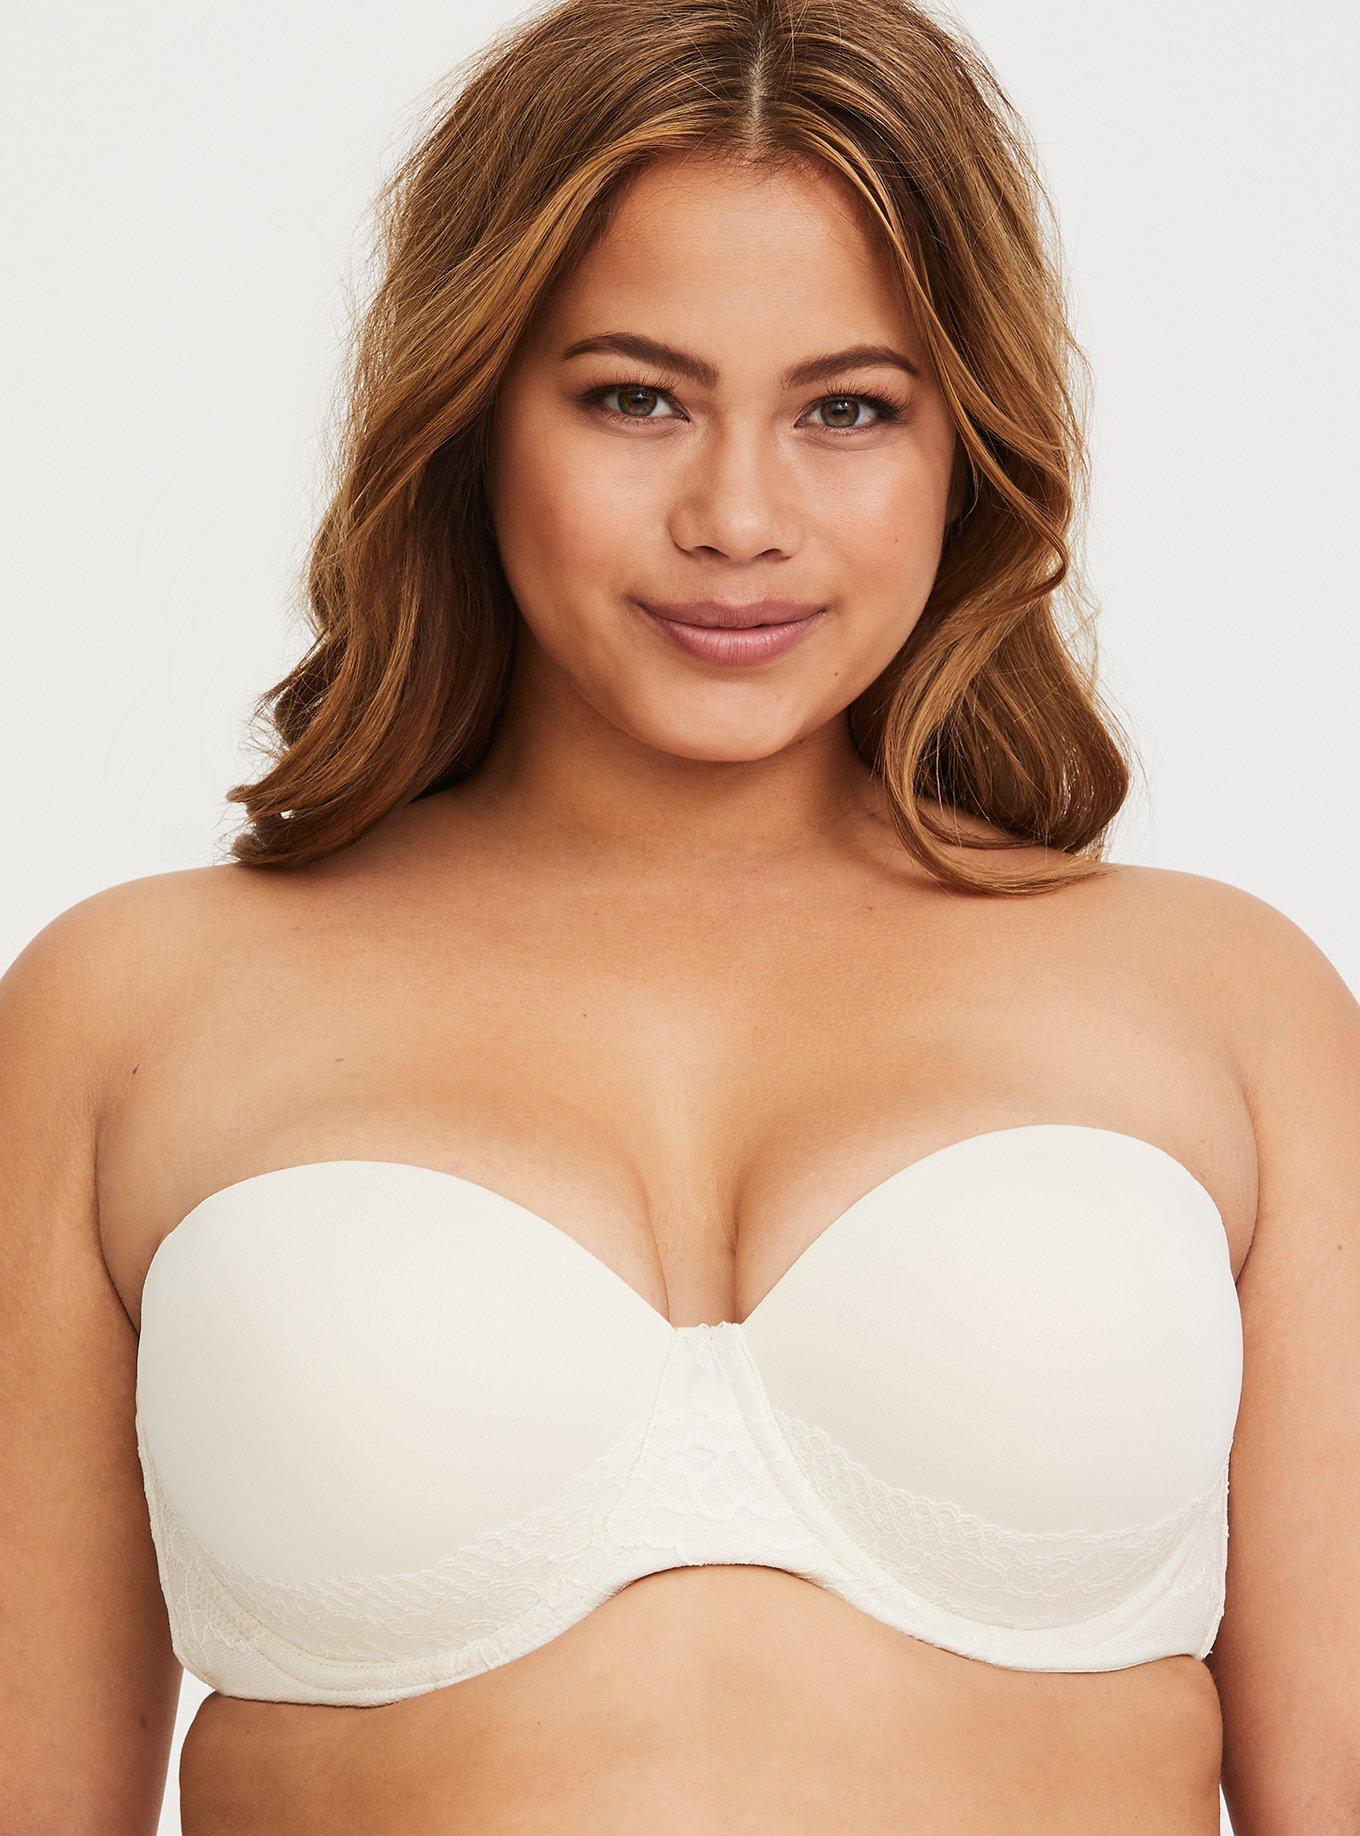 Torrid - A Push-Up Strapless Bra so comfortable and